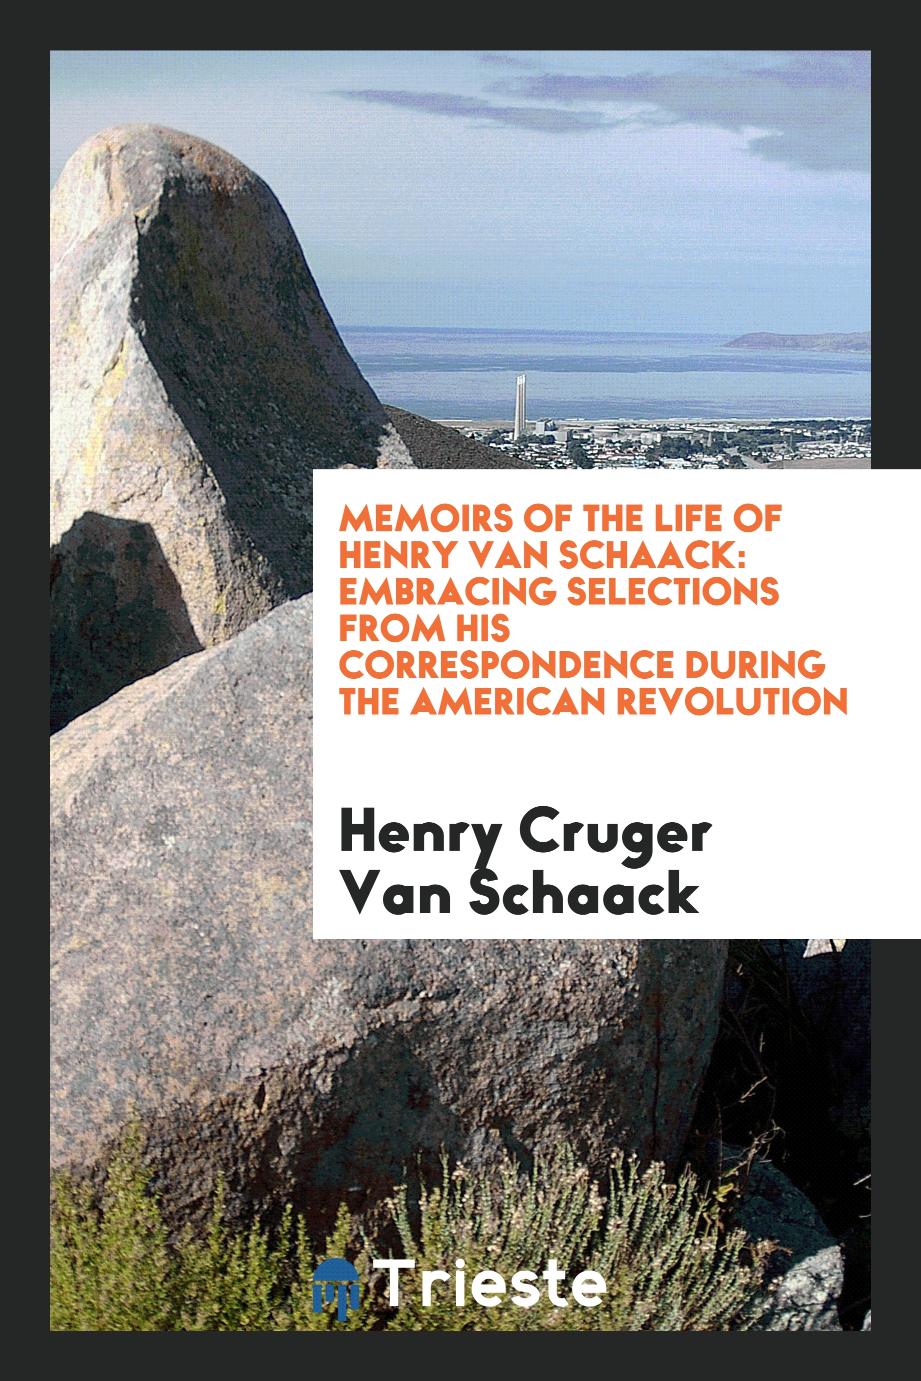 Memoirs of the Life of Henry Van Schaack: Embracing Selections from His Correspondence During the American Revolution